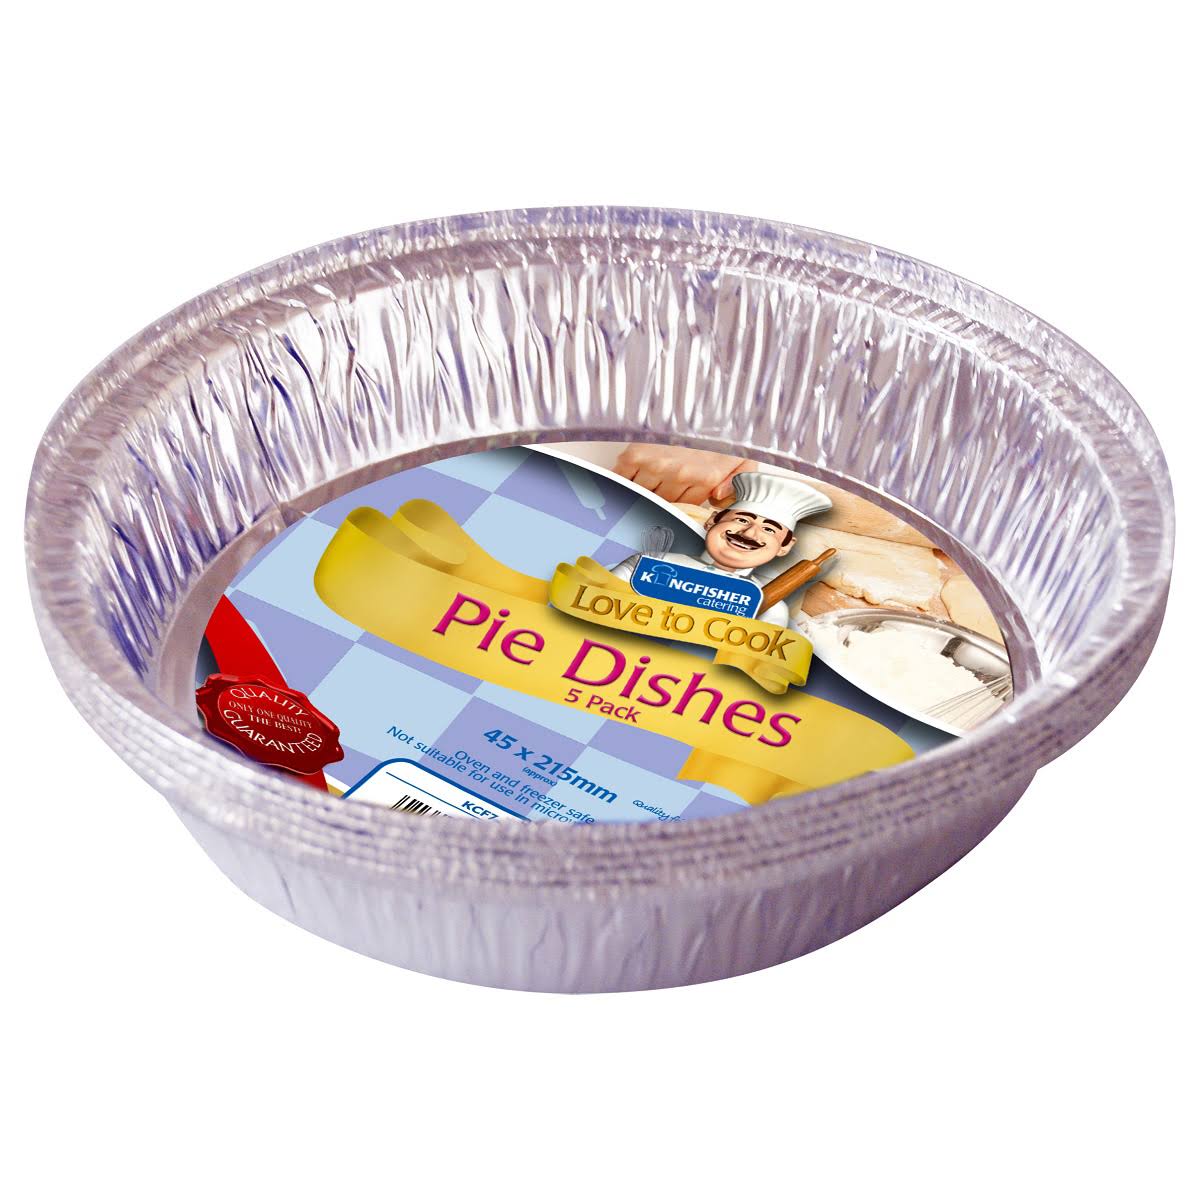 Kingfisher Foil Pie Dishes - 5 Pack, Round